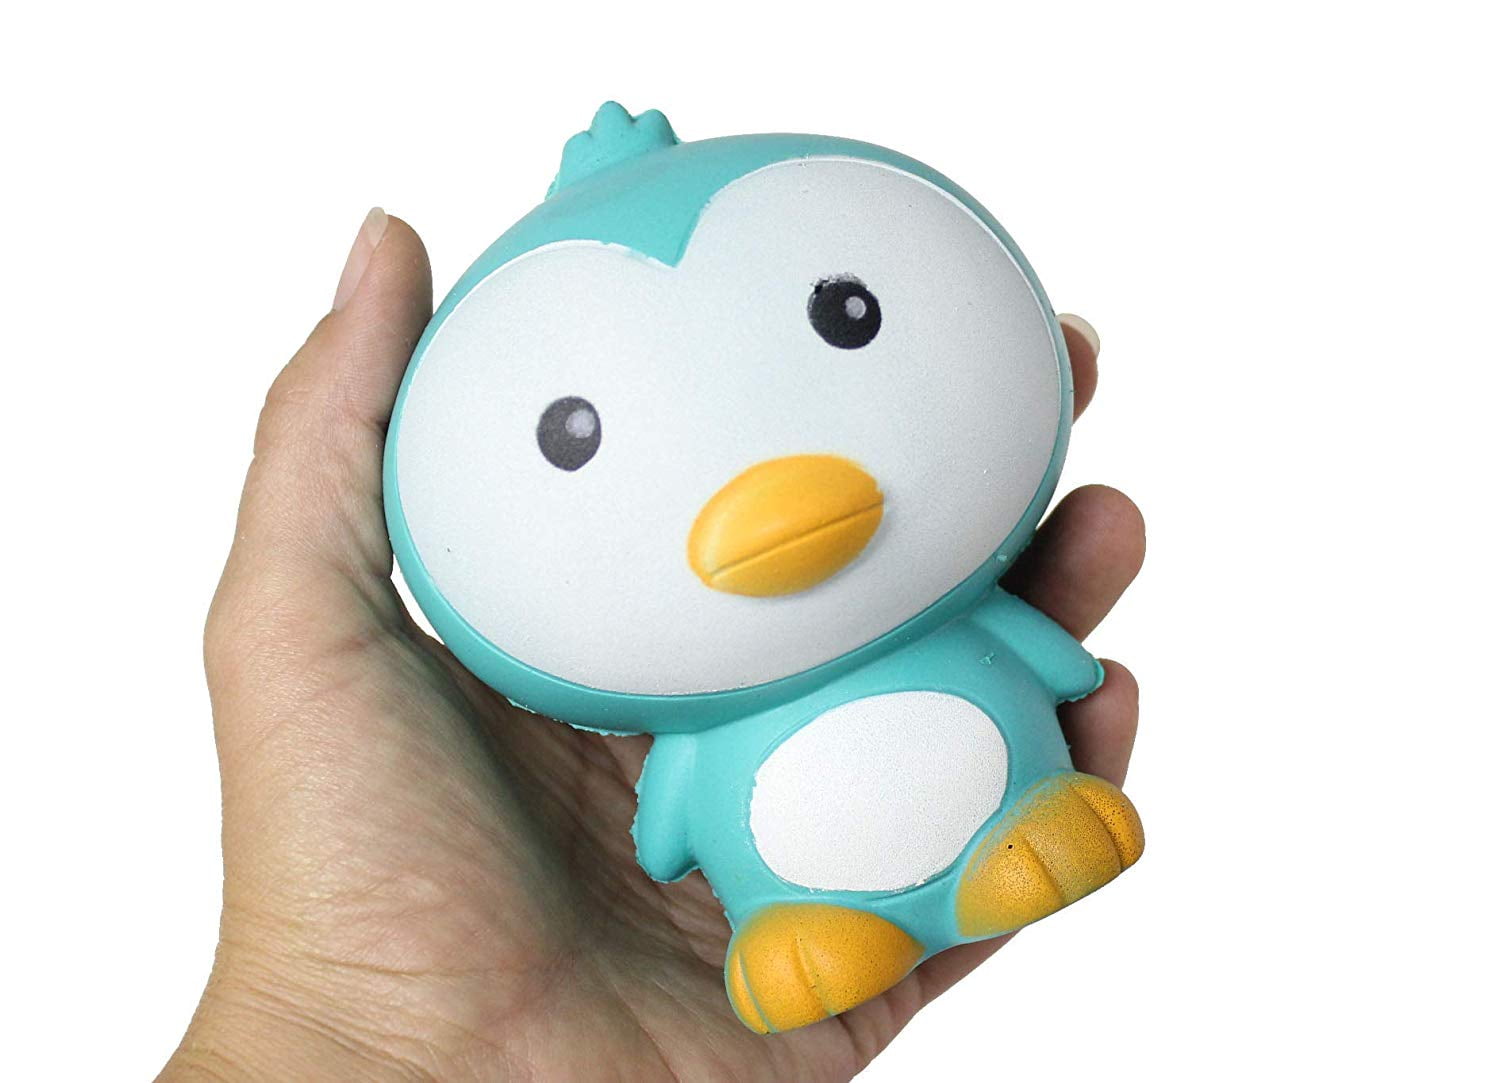 DIGOOD Color Change Squishies Toys Penguin Style Slow Rising Scented Reliever Stress Toy Decor